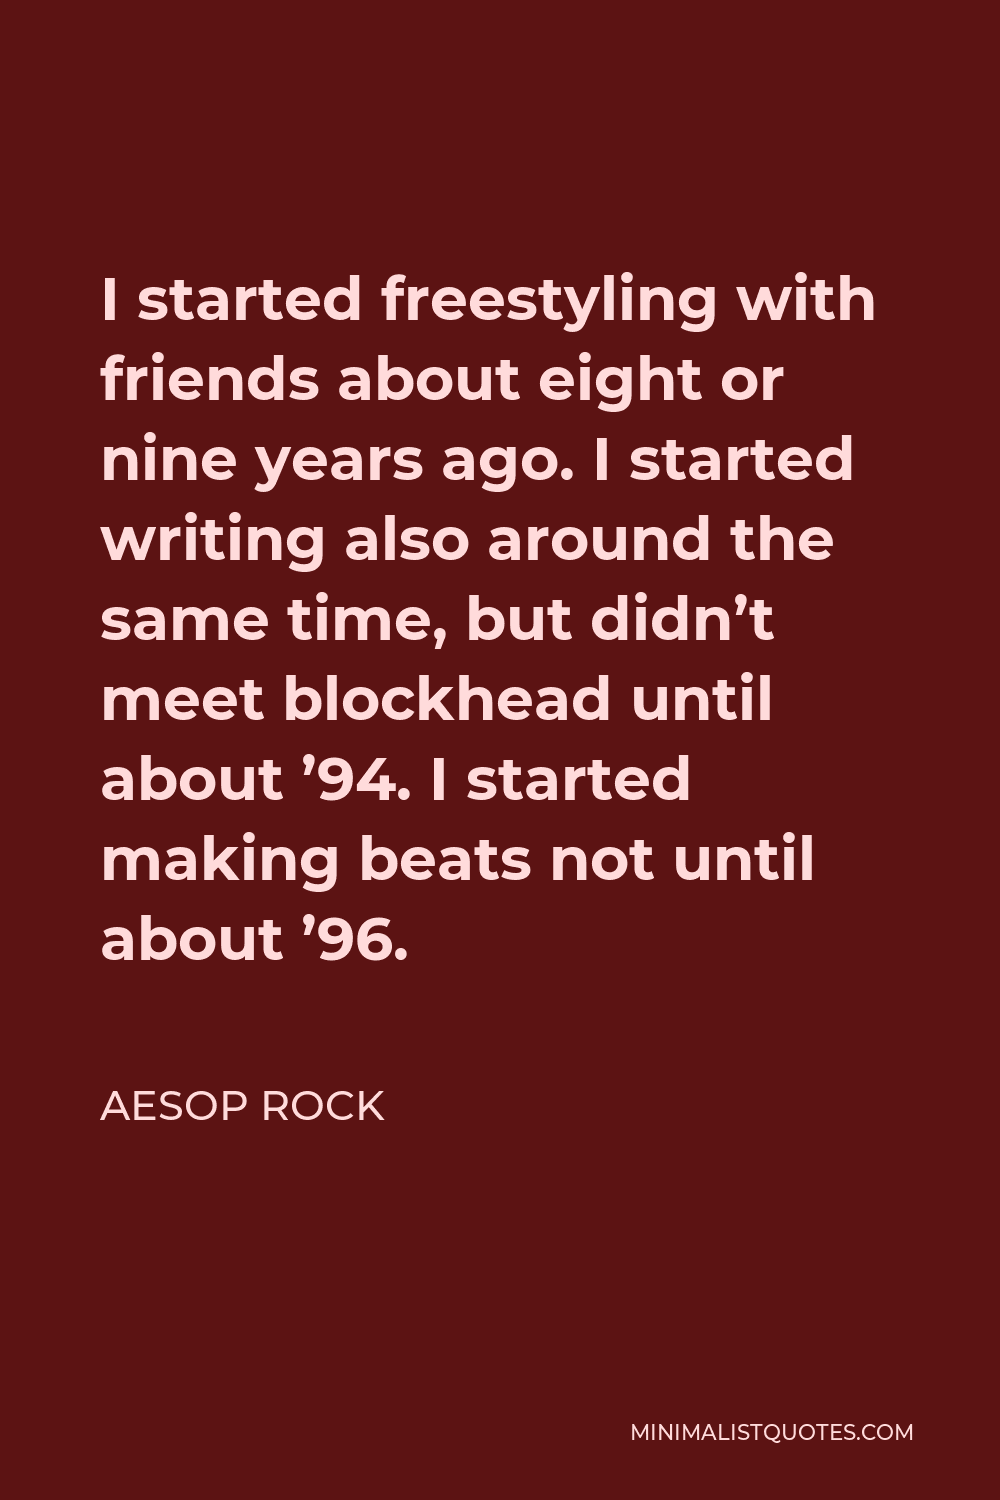 Aesop Rock Quote - I started freestyling with friends about eight or nine years ago. I started writing also around the same time, but didn’t meet blockhead until about ’94. I started making beats not until about ’96.